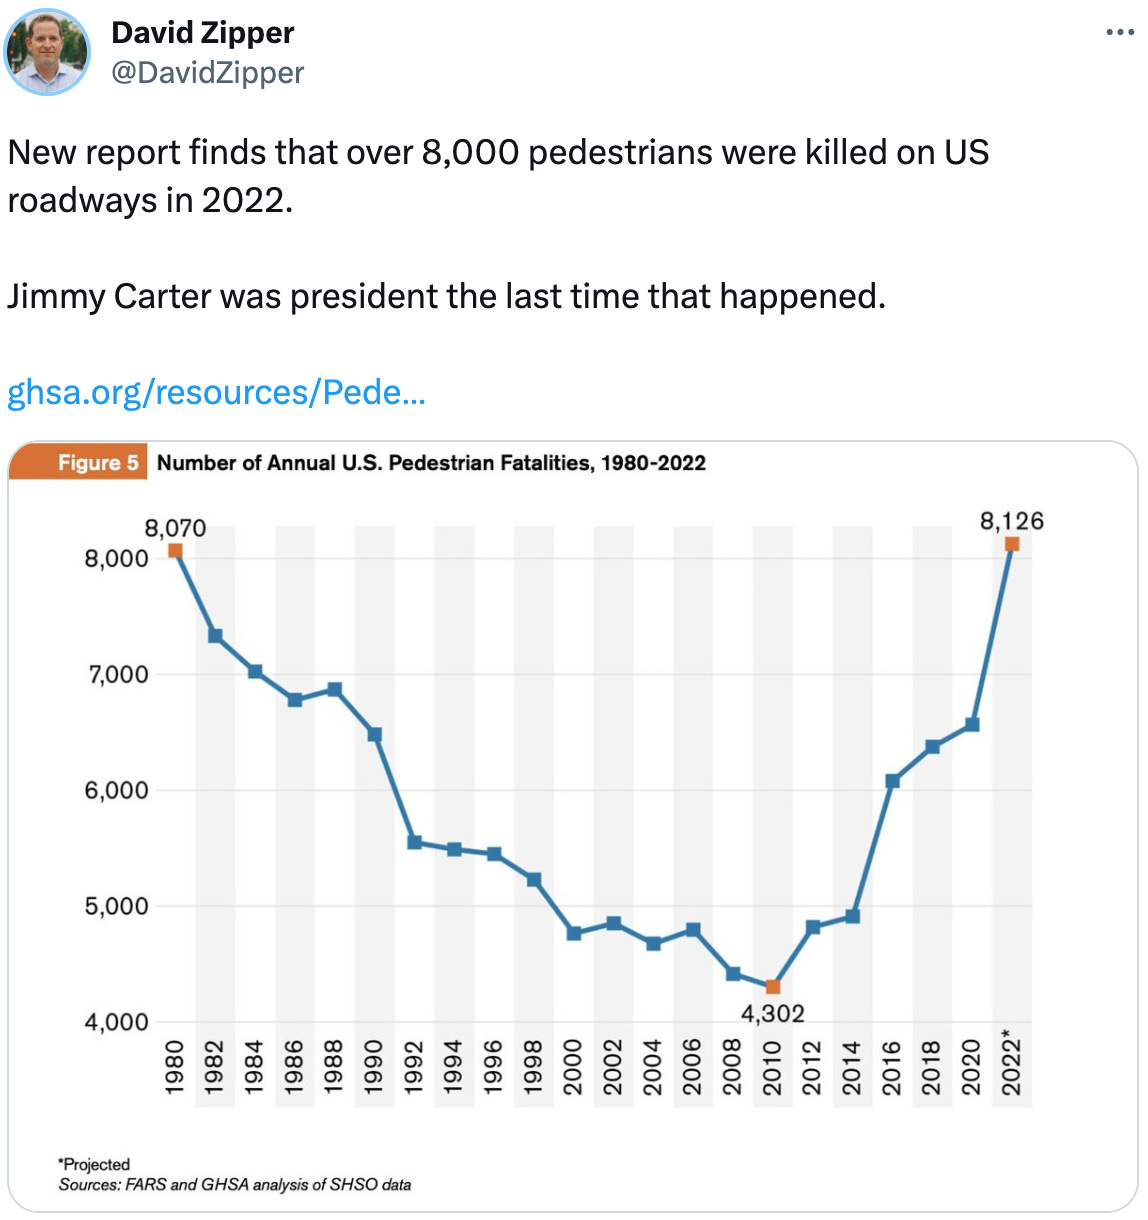  David Zipper @DavidZipper New report finds that over 8,000 pedestrians were killed on US roadways in 2022.  Jimmy Carter was president the last time that happened.  https://ghsa.org/resources/Pedestrians23